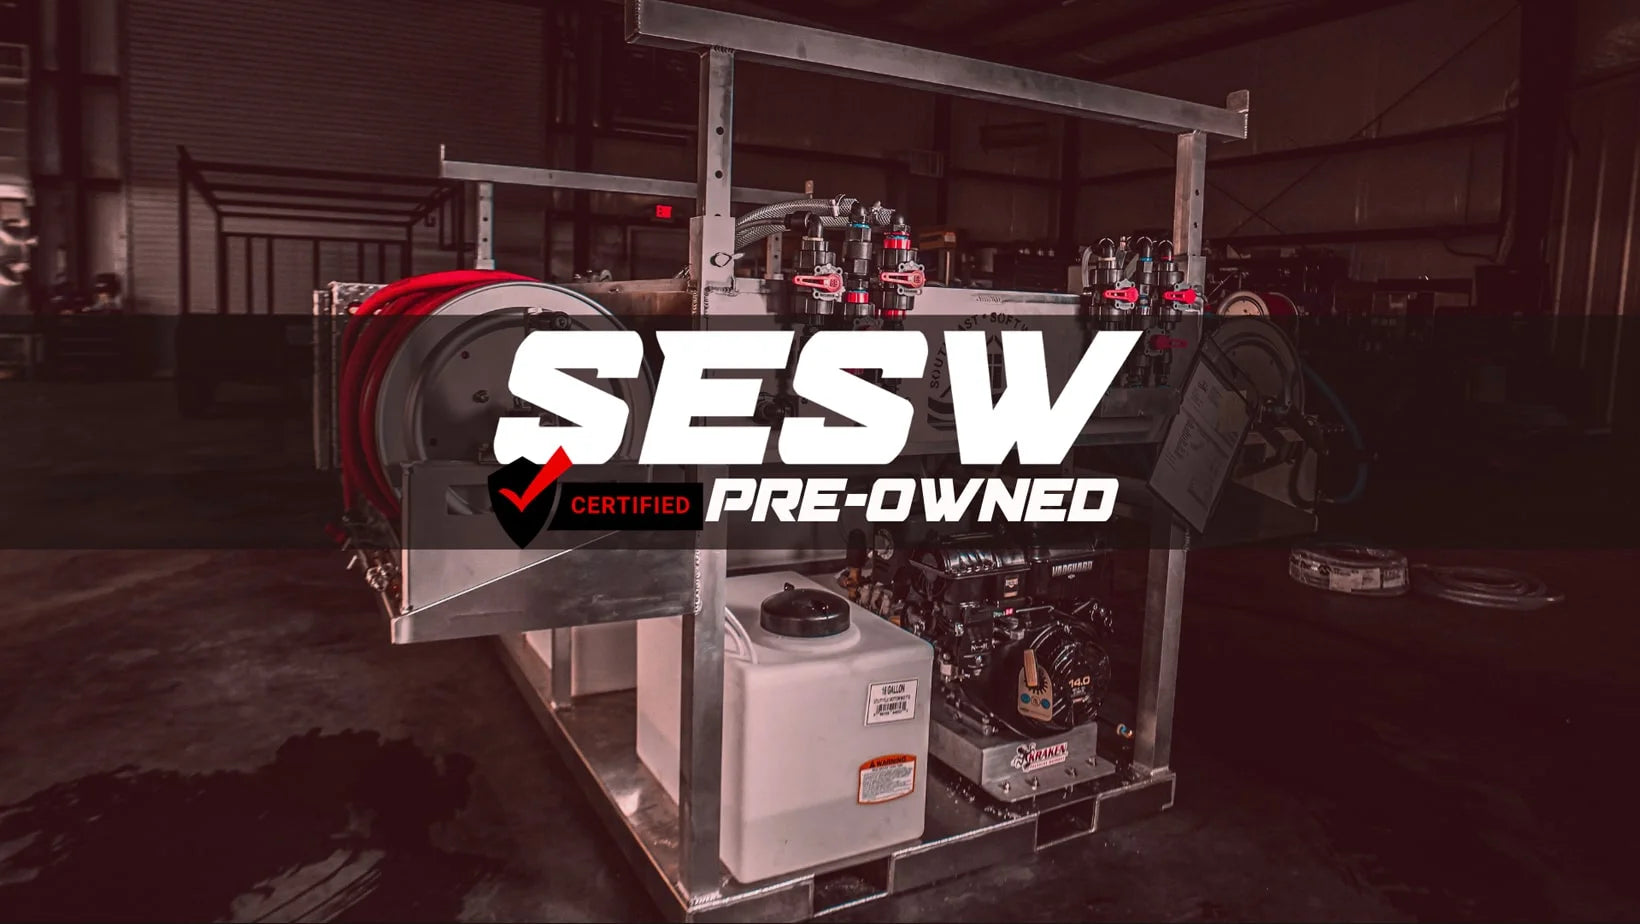 SESW CERTIFIED PRE OWNED EQUIPMENT